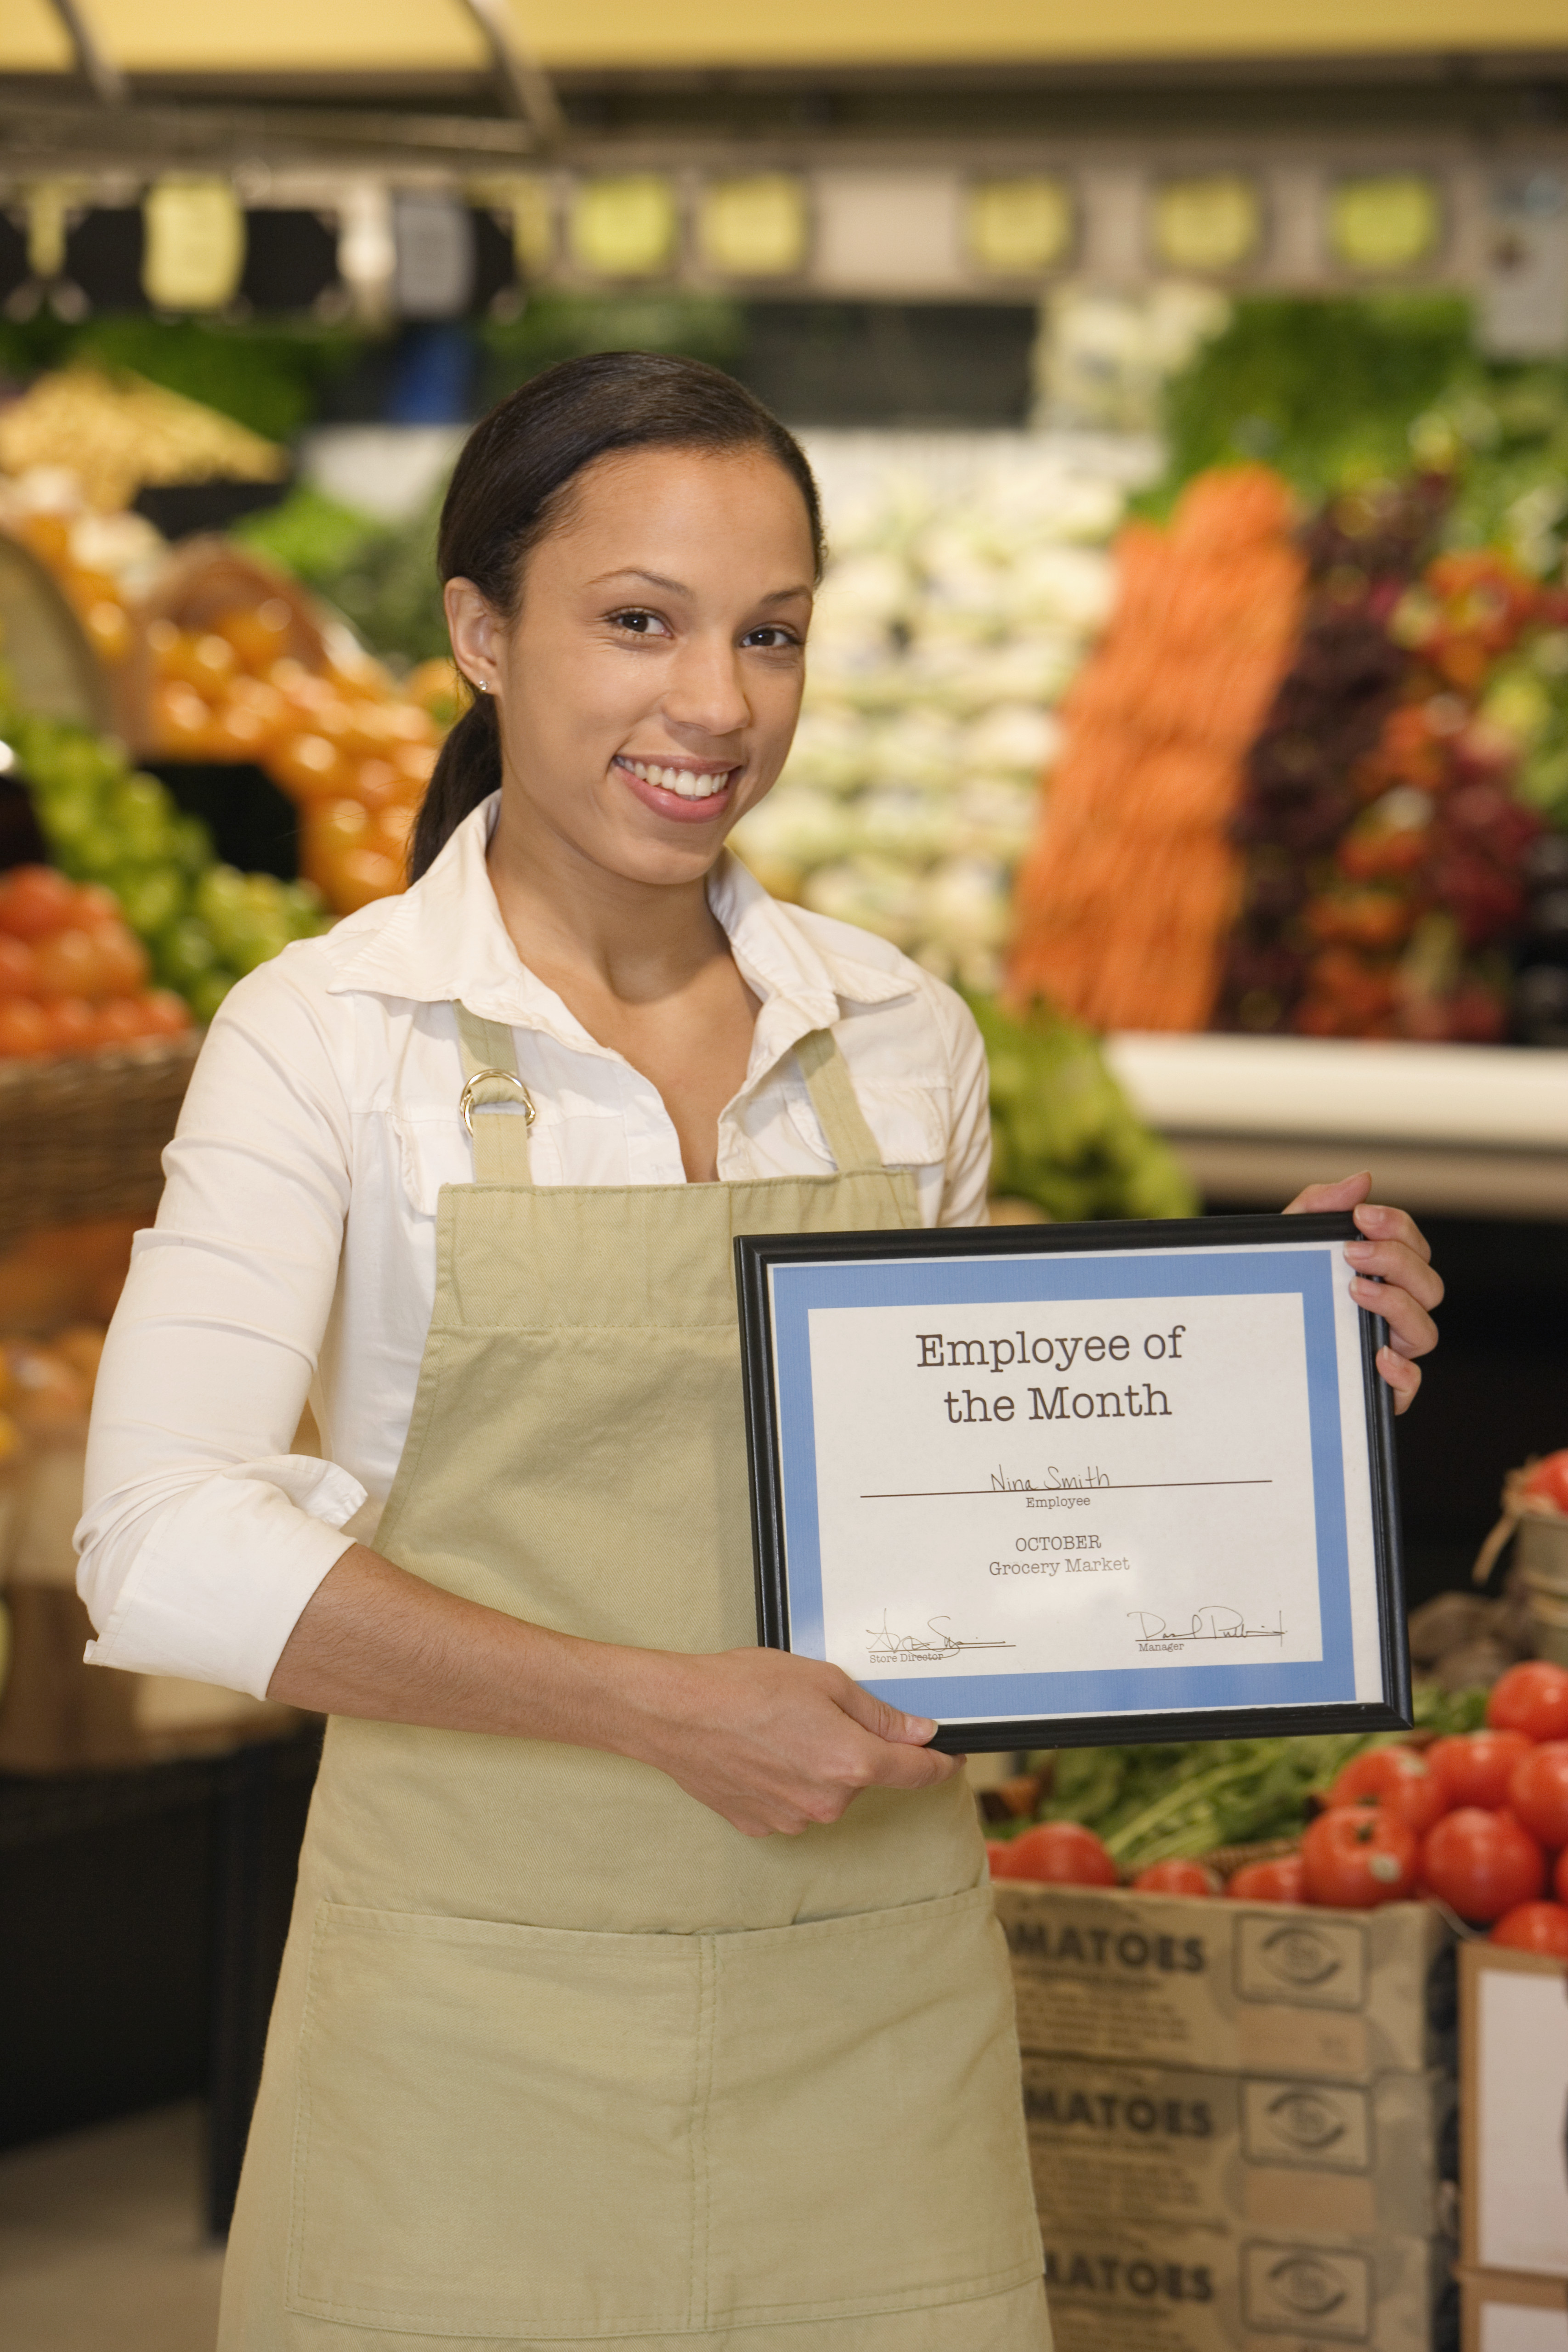 Portrait of grocery employee holding employee of the month plaque.